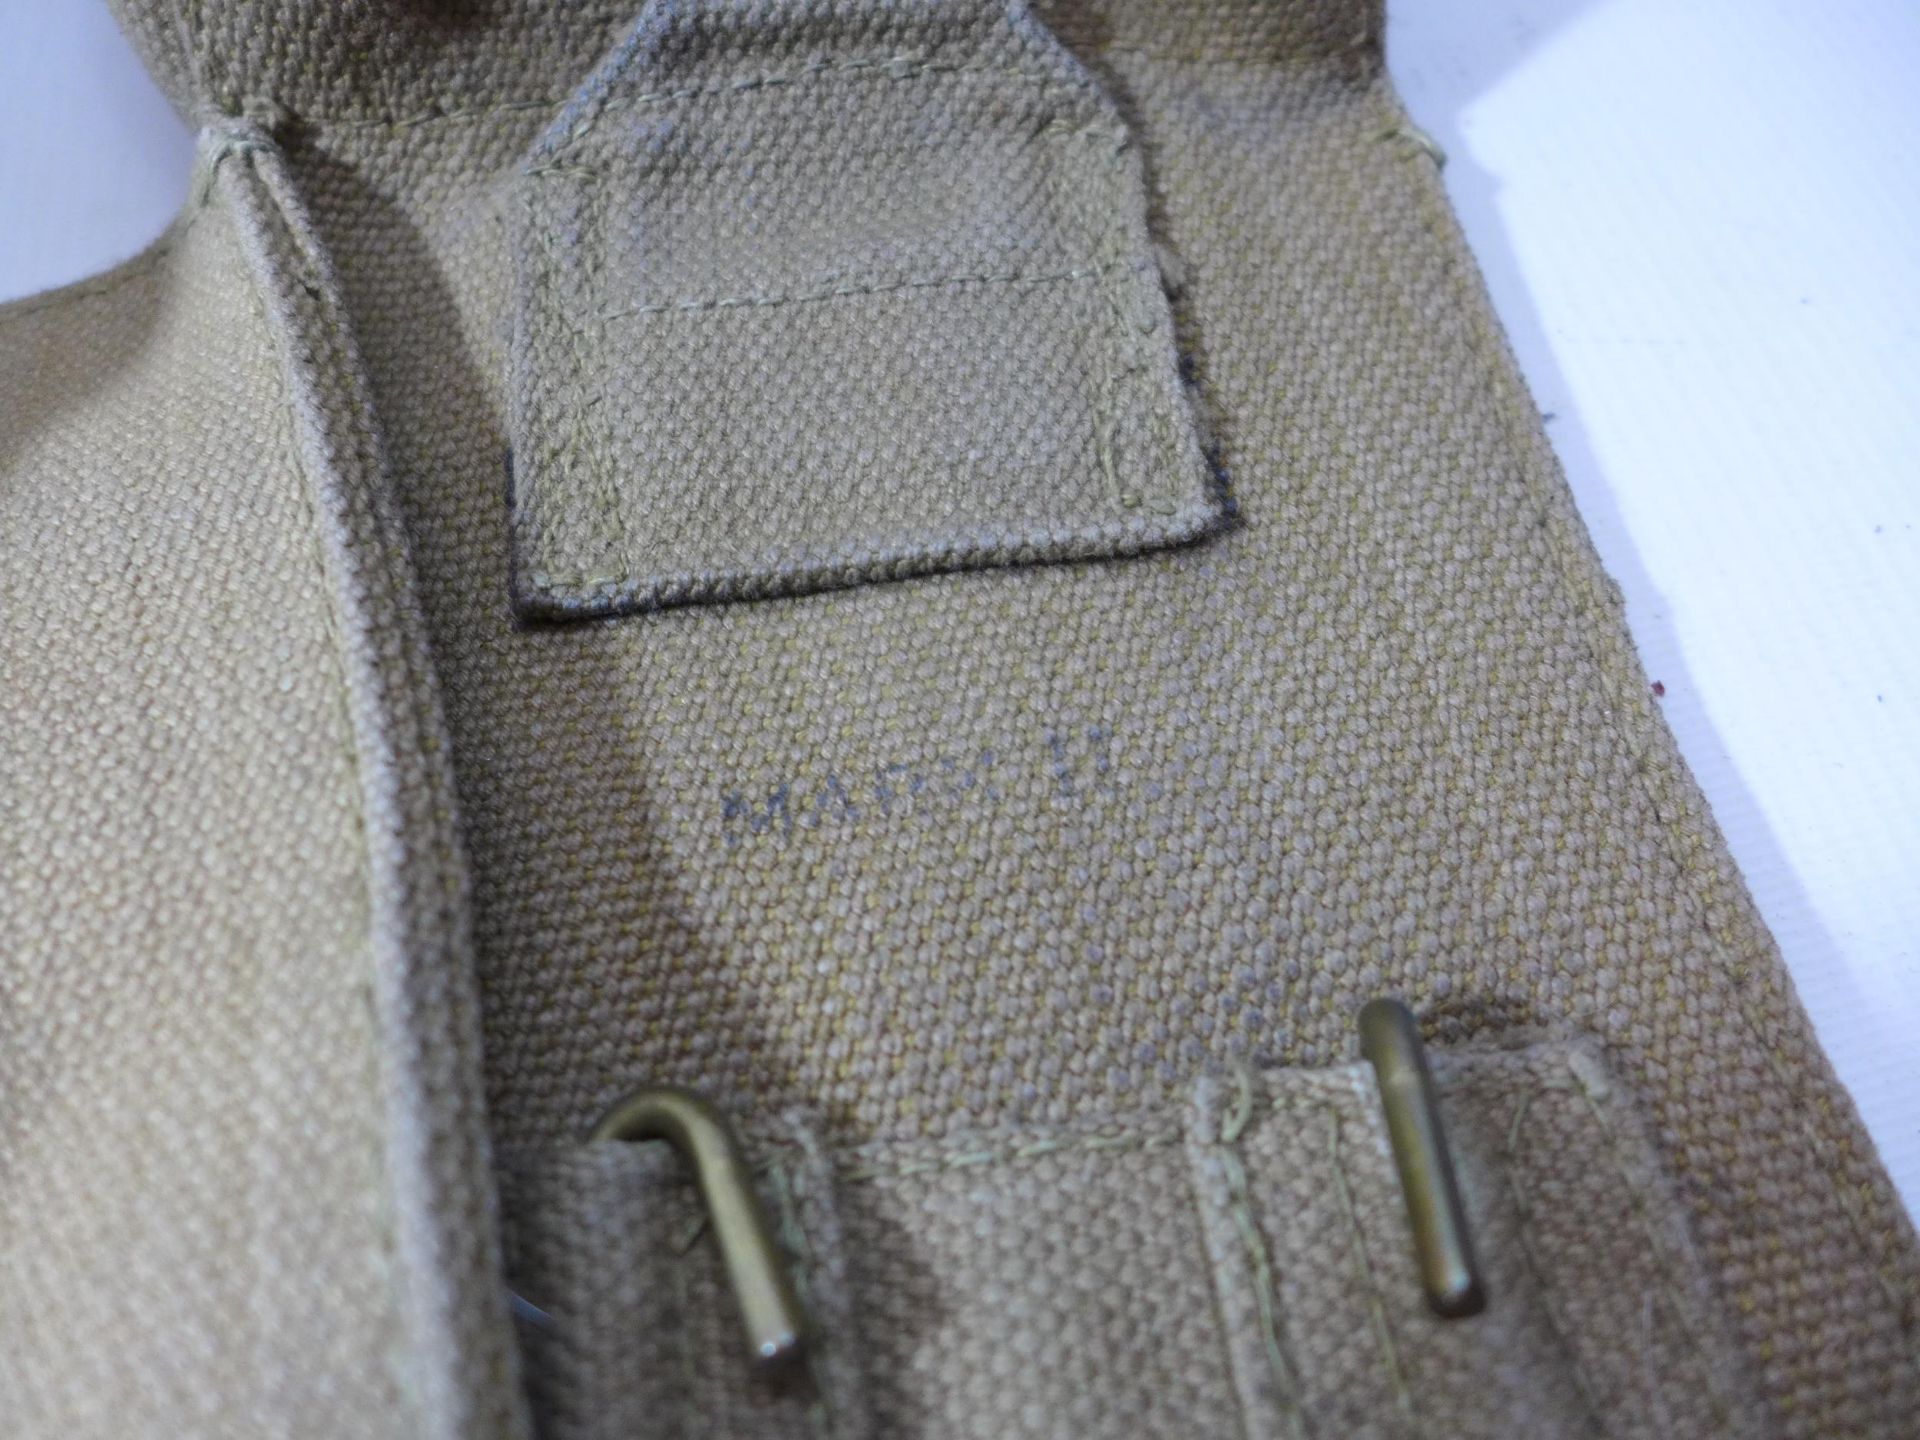 A 1940 DATED CANVAS AMMUNITION POUCH, CANVAS BAG AND A CANVAS SATCHEL (3) - Image 4 of 5